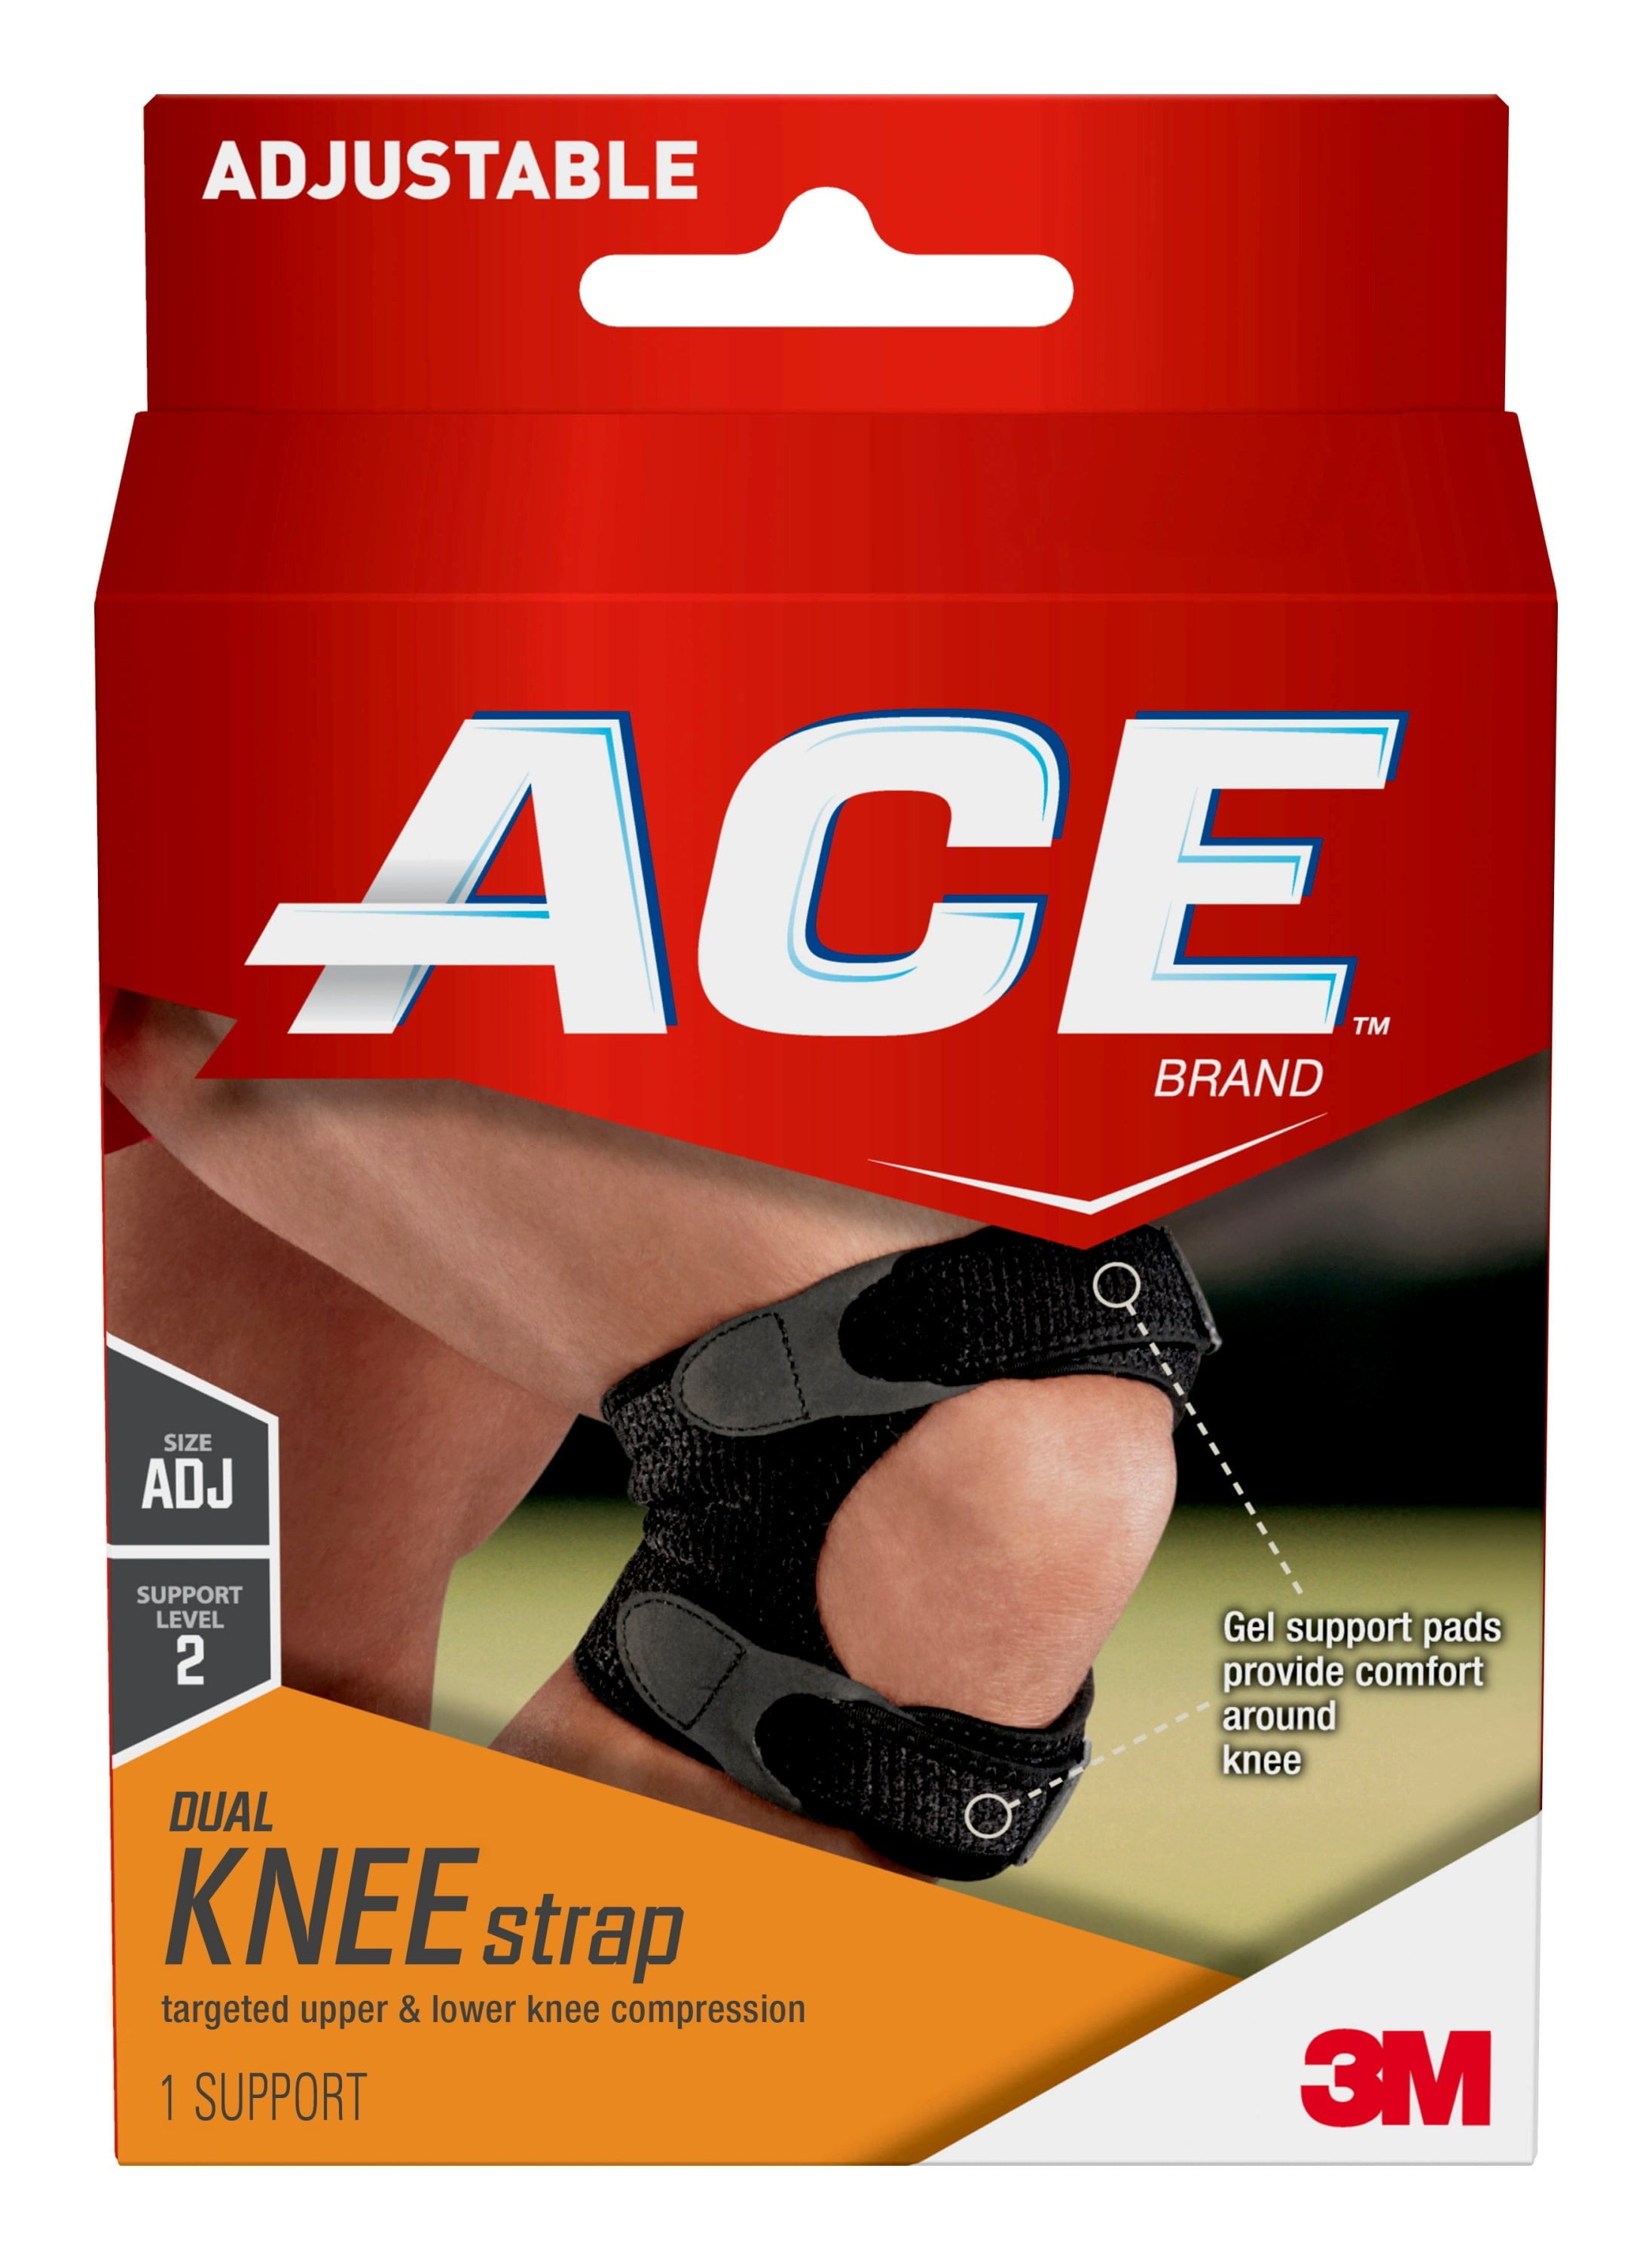 ACE Brand Adjustable Dual Knee Strap, Upper and Lower Support